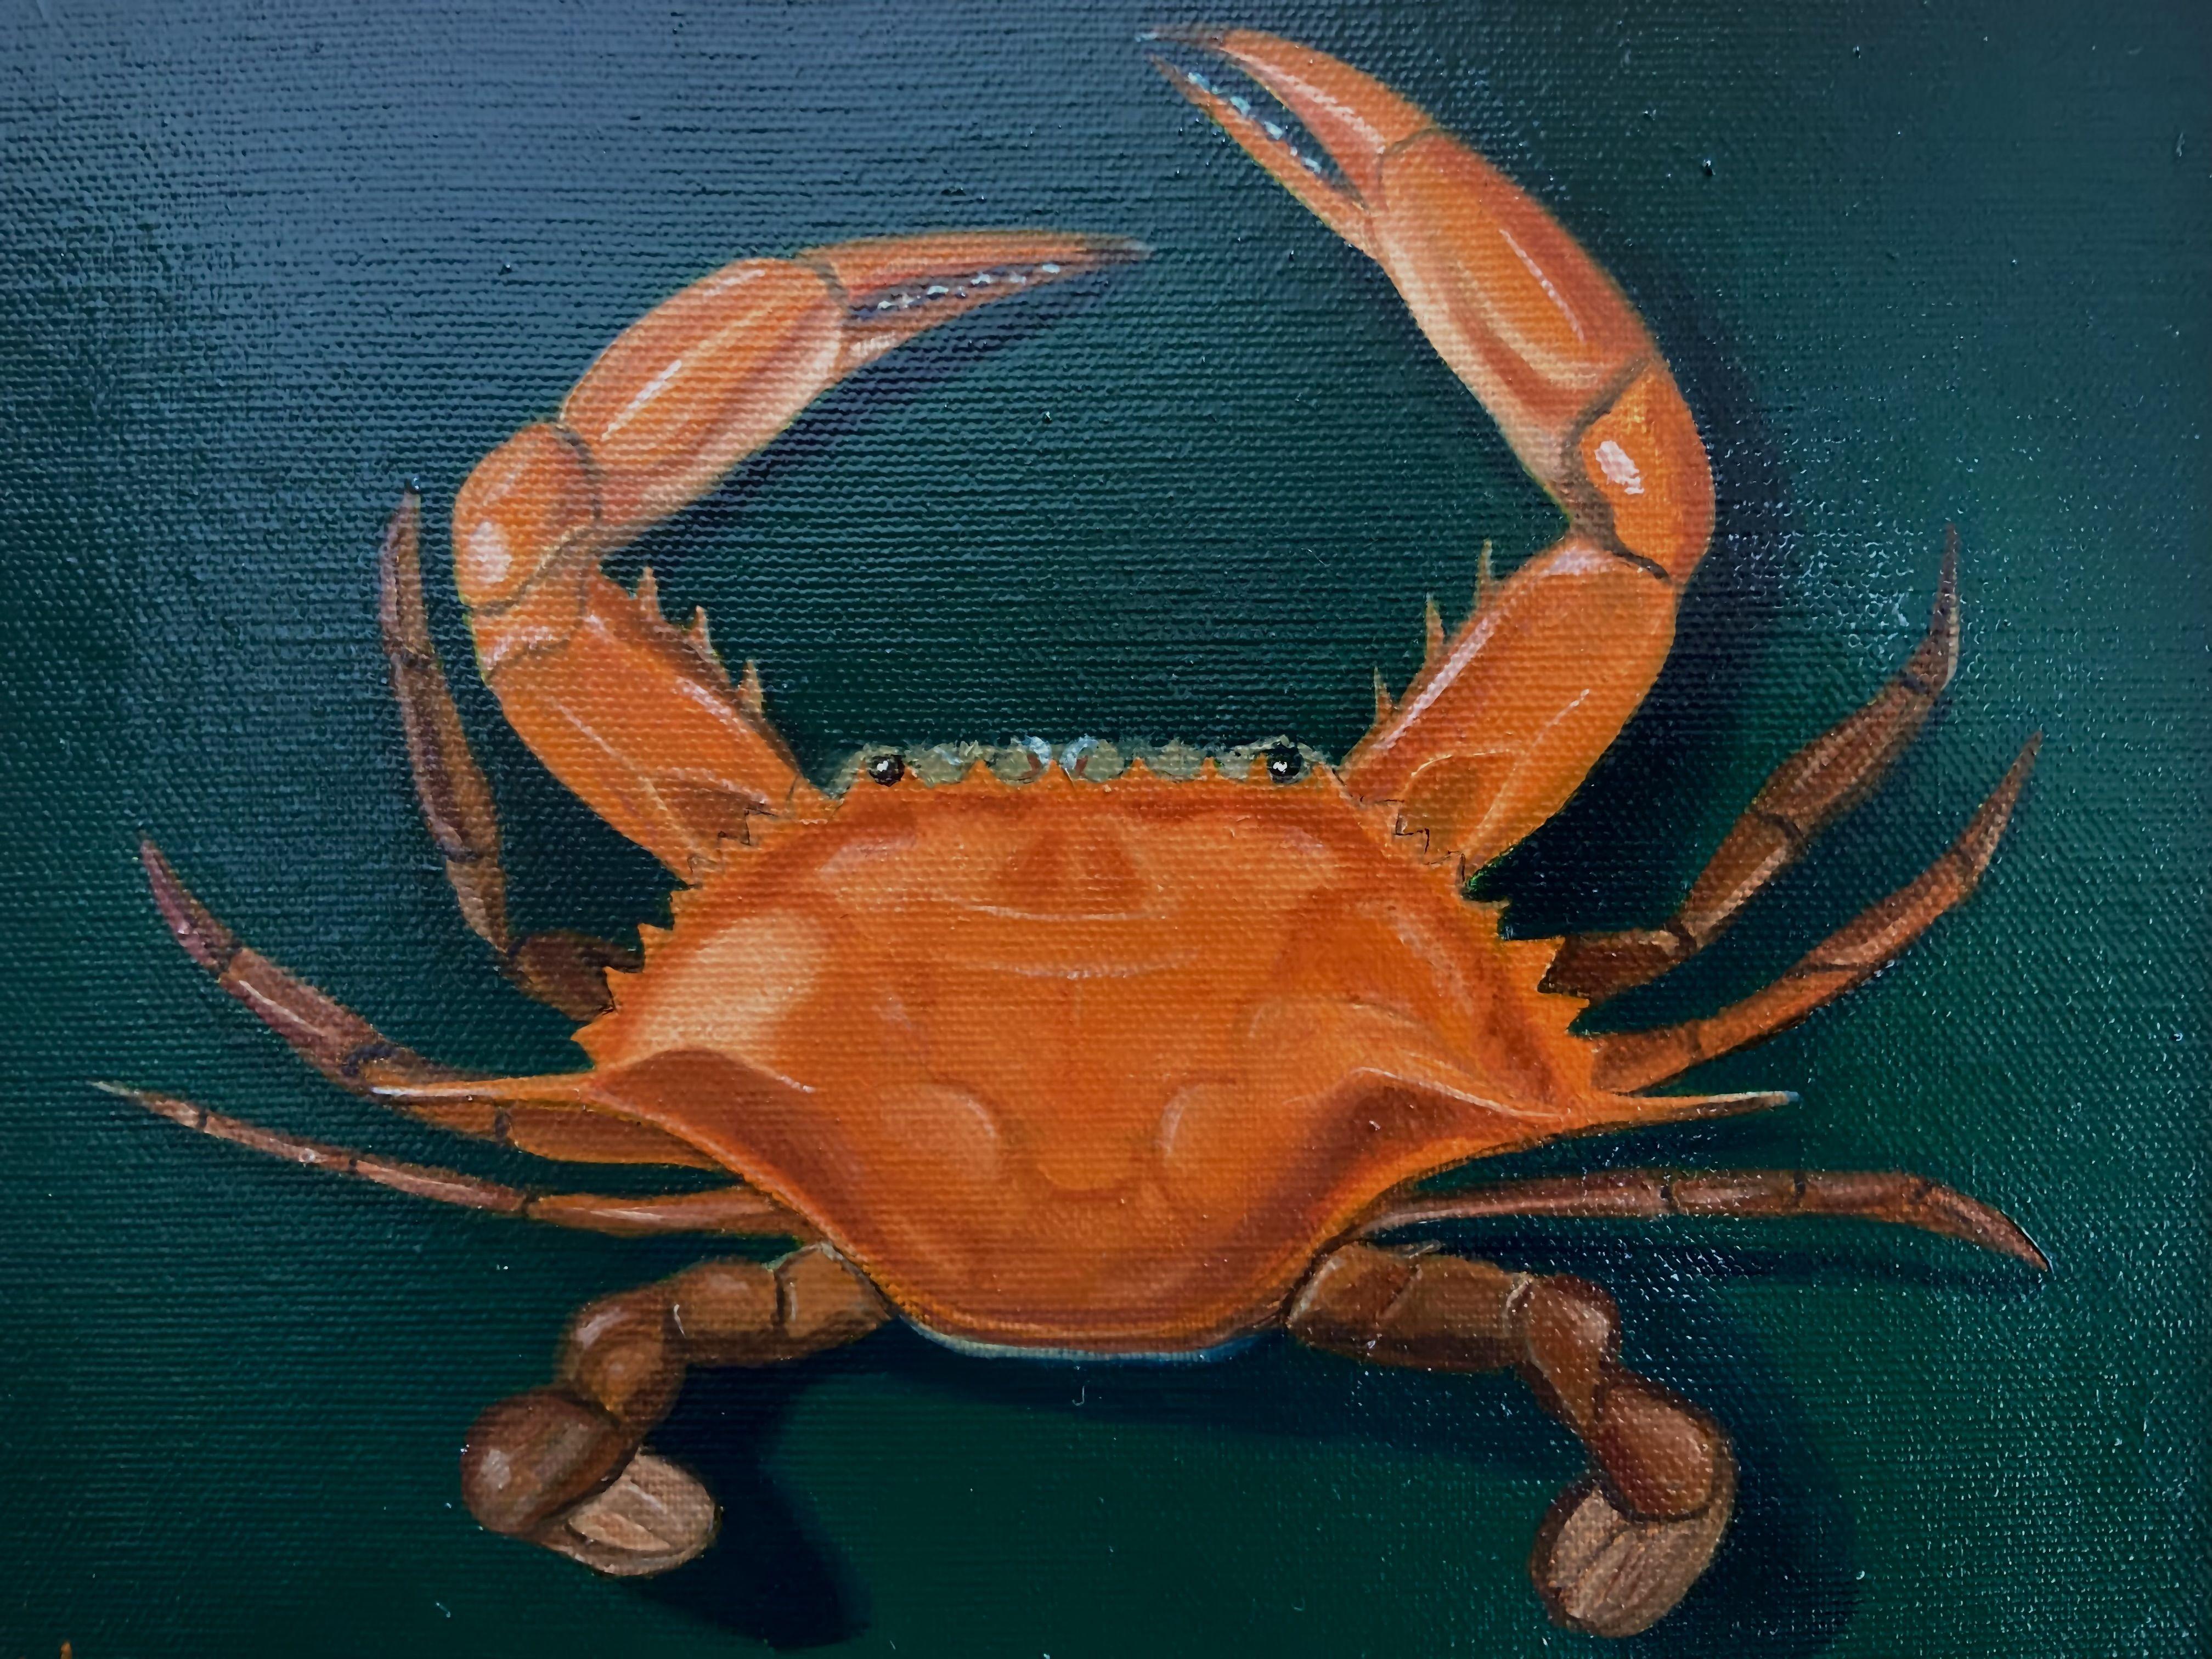 This piece is a Maryland Blue Crab that has been cooked and ready to hang on your wall.  This piece will make a great addition to your home or business where you gather with friends for those memorable crab feasts.  The piece is 8x10 on canvas,